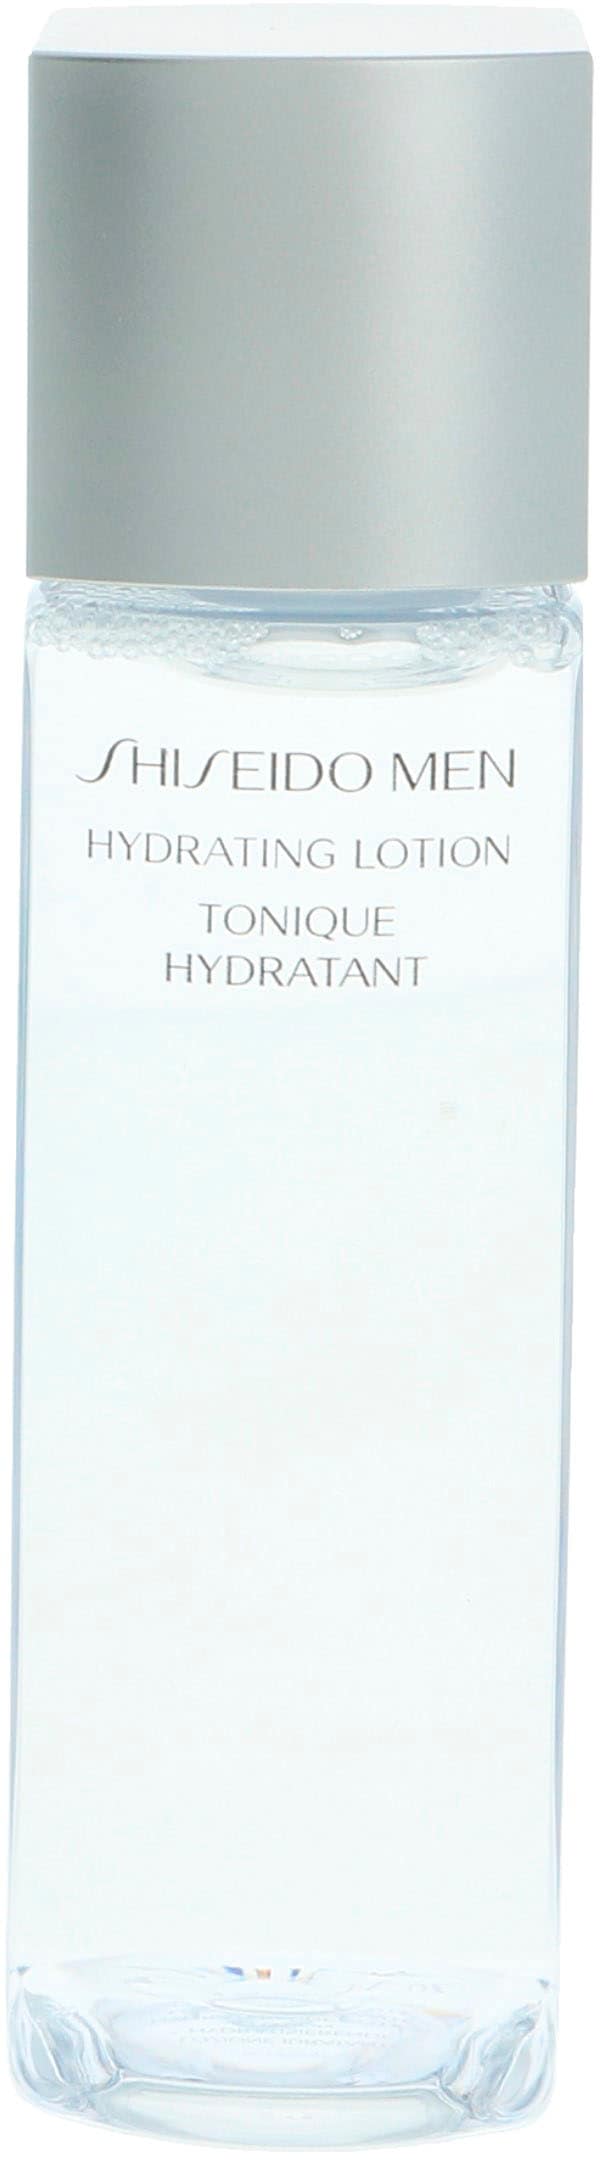 Gesichtslotion »Hydrating Lotion«